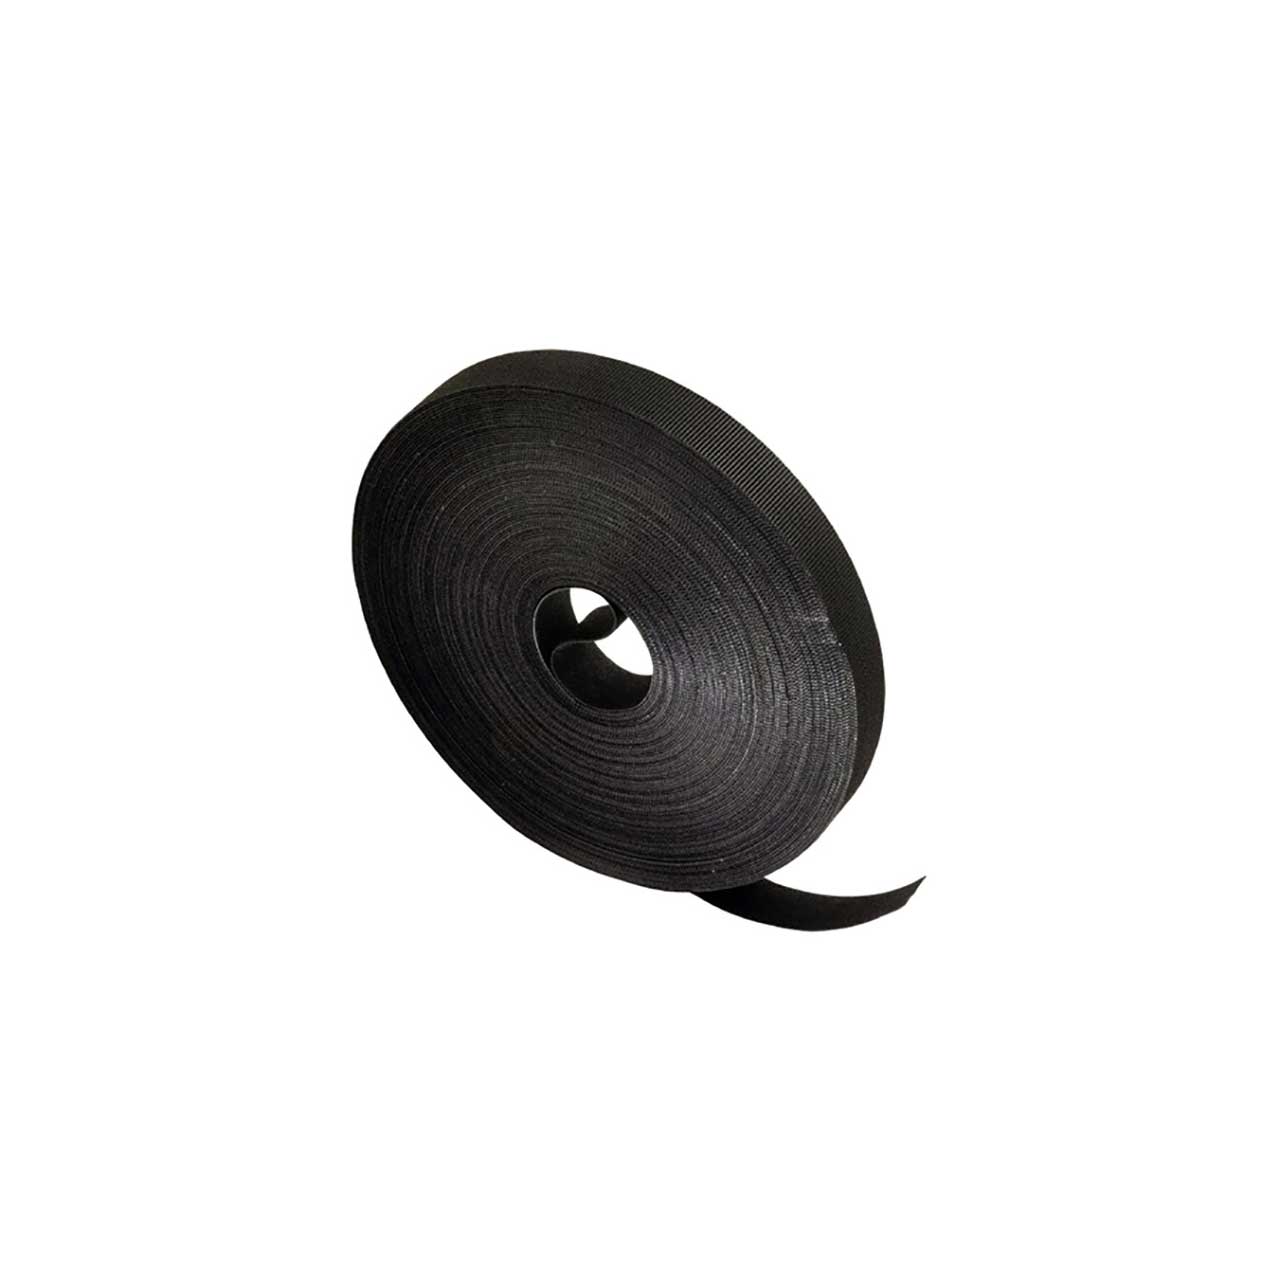 VELCRO Brand One-wrap Thin Ties 8in X 1/2in Gray and Black 50 Ct